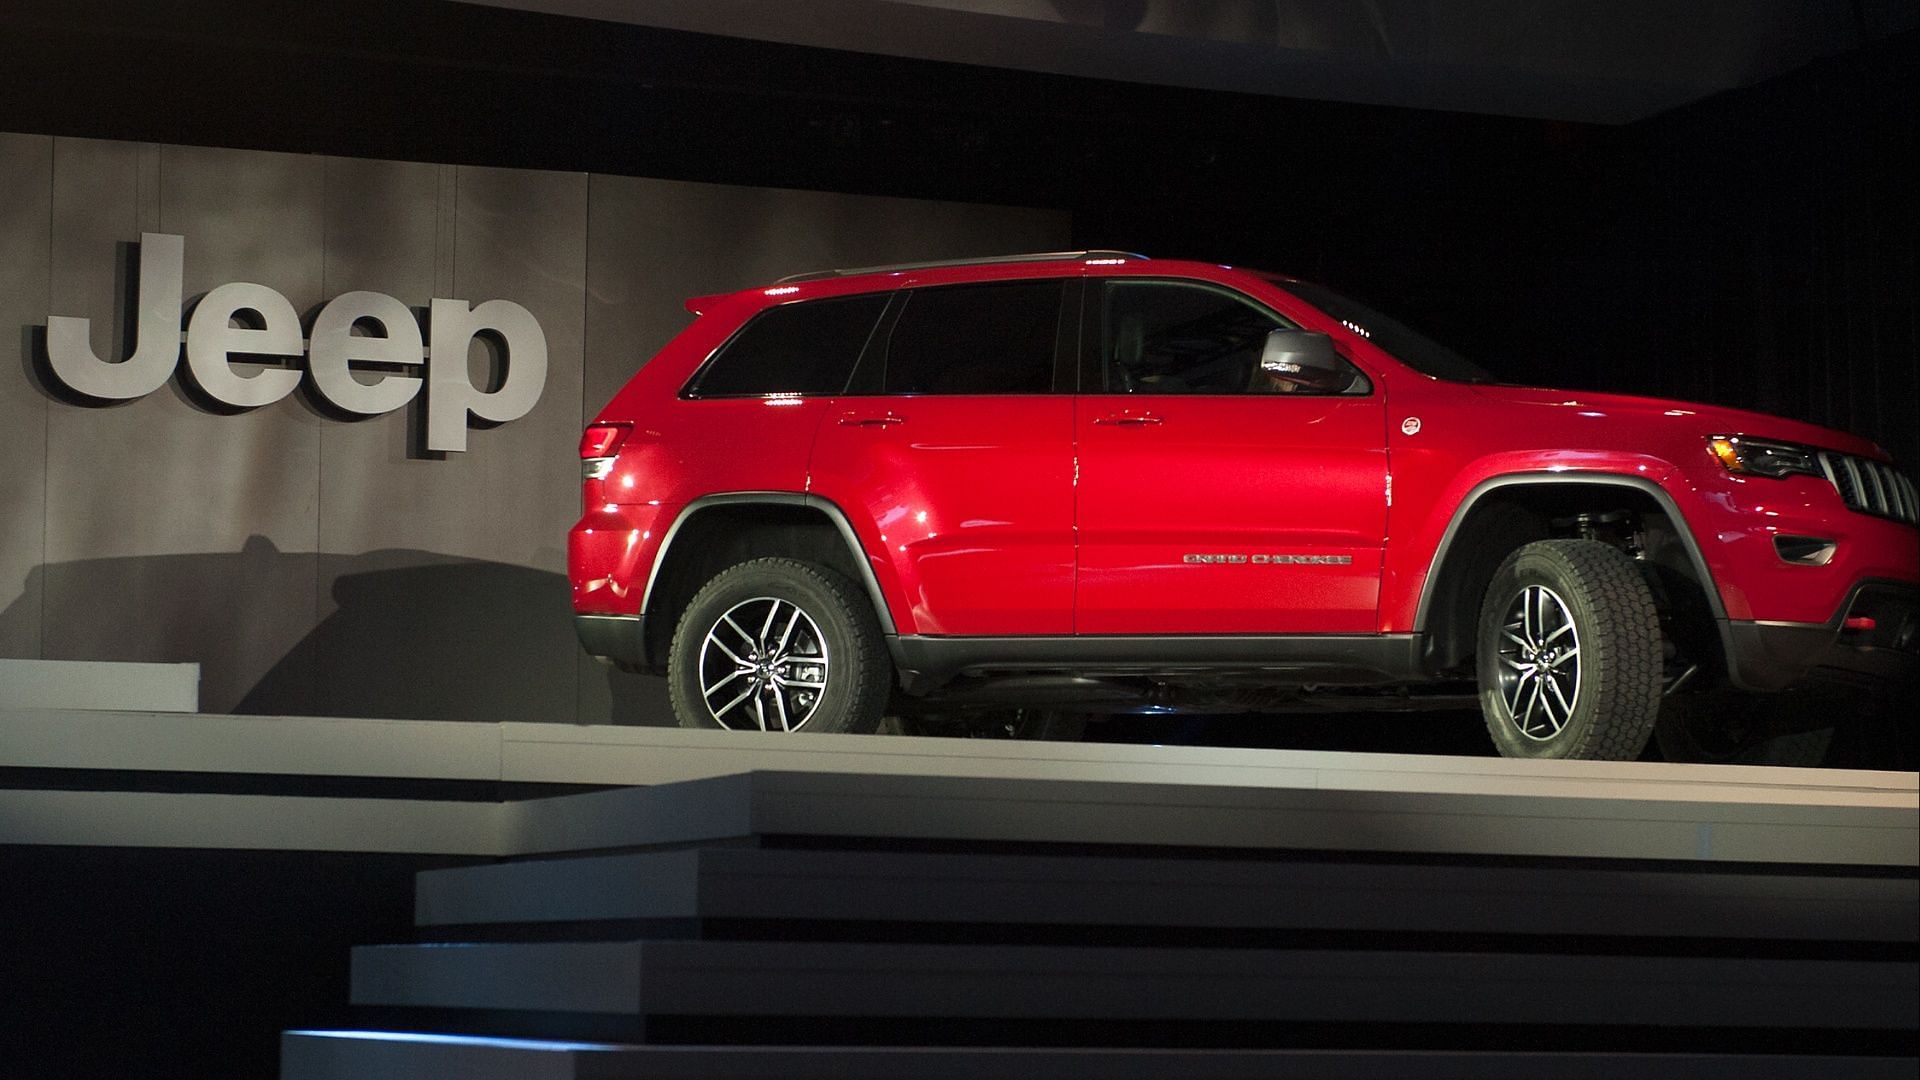 The recalled Jeep Cherokee SUVs could catch fire even when the engines are turned off (Image via Bryan Thomas/ Getty Images)